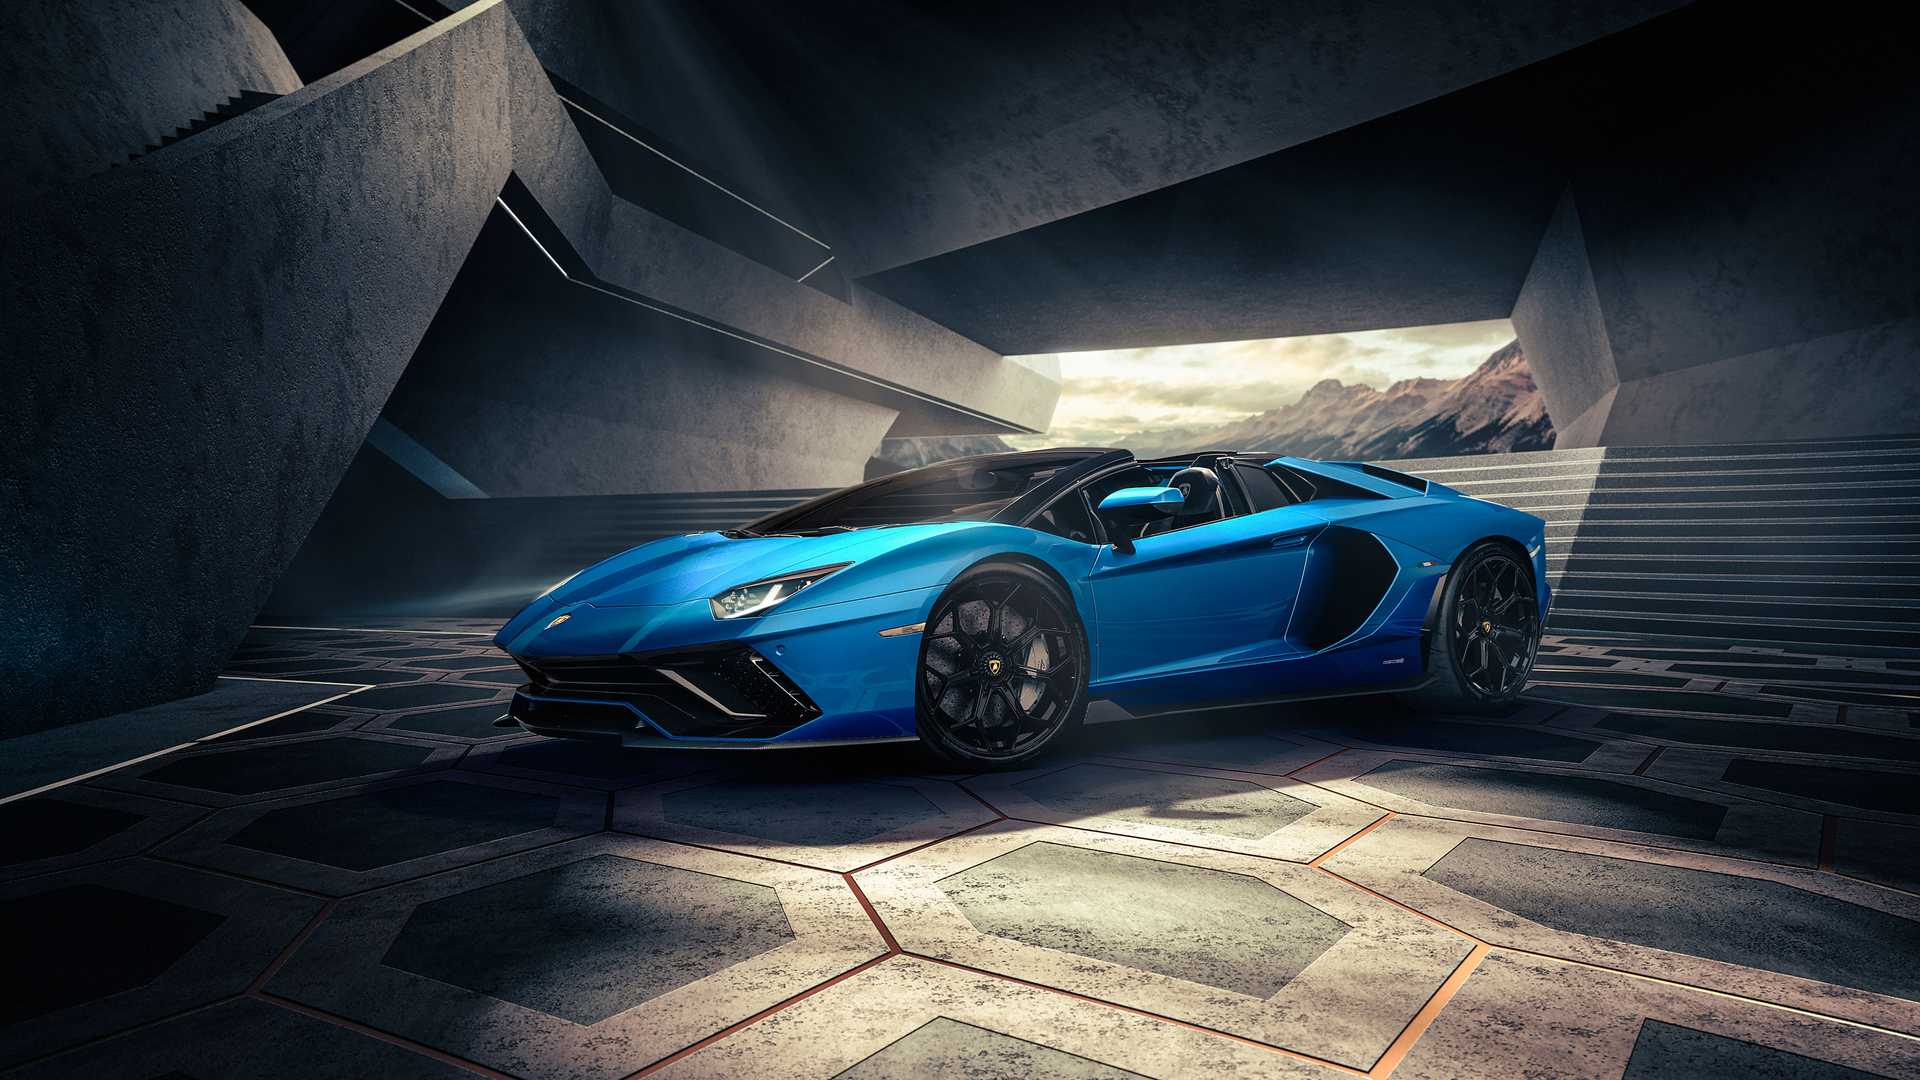 End of an era: The Lamborghini Aventador V12 is being discontinued